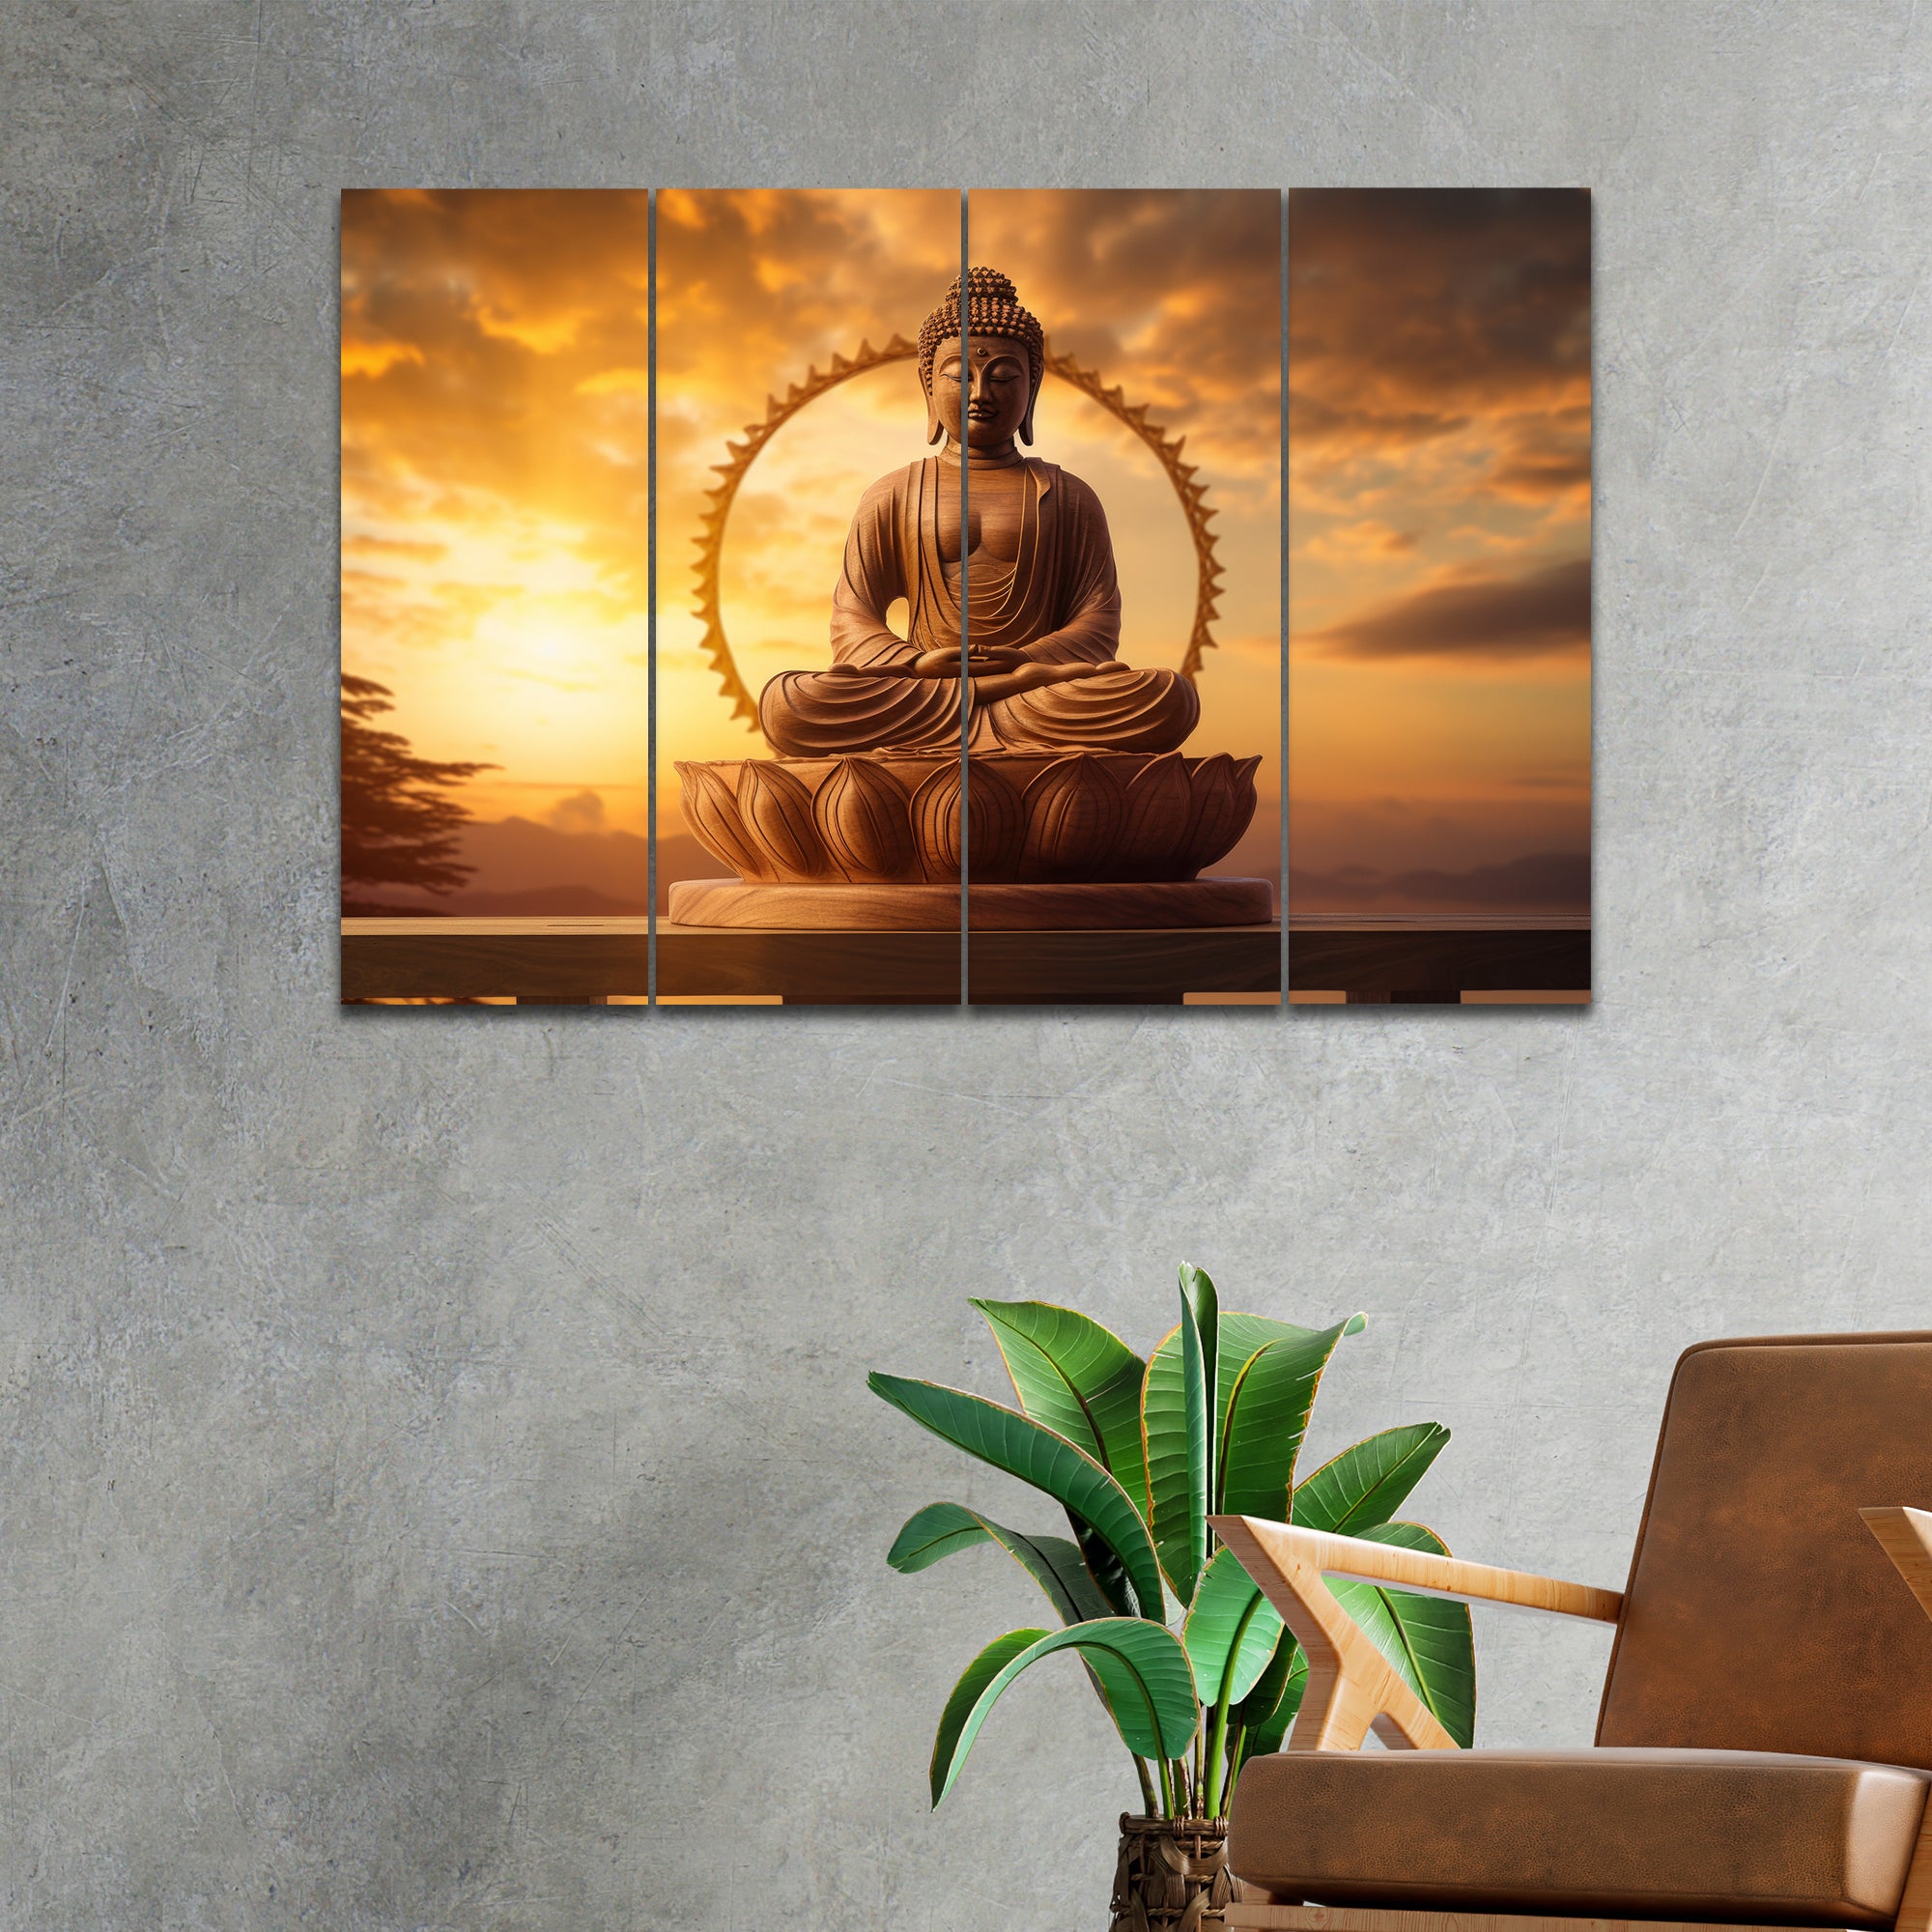 Buddha Statue And Sun Rise In 4 Panel Painting